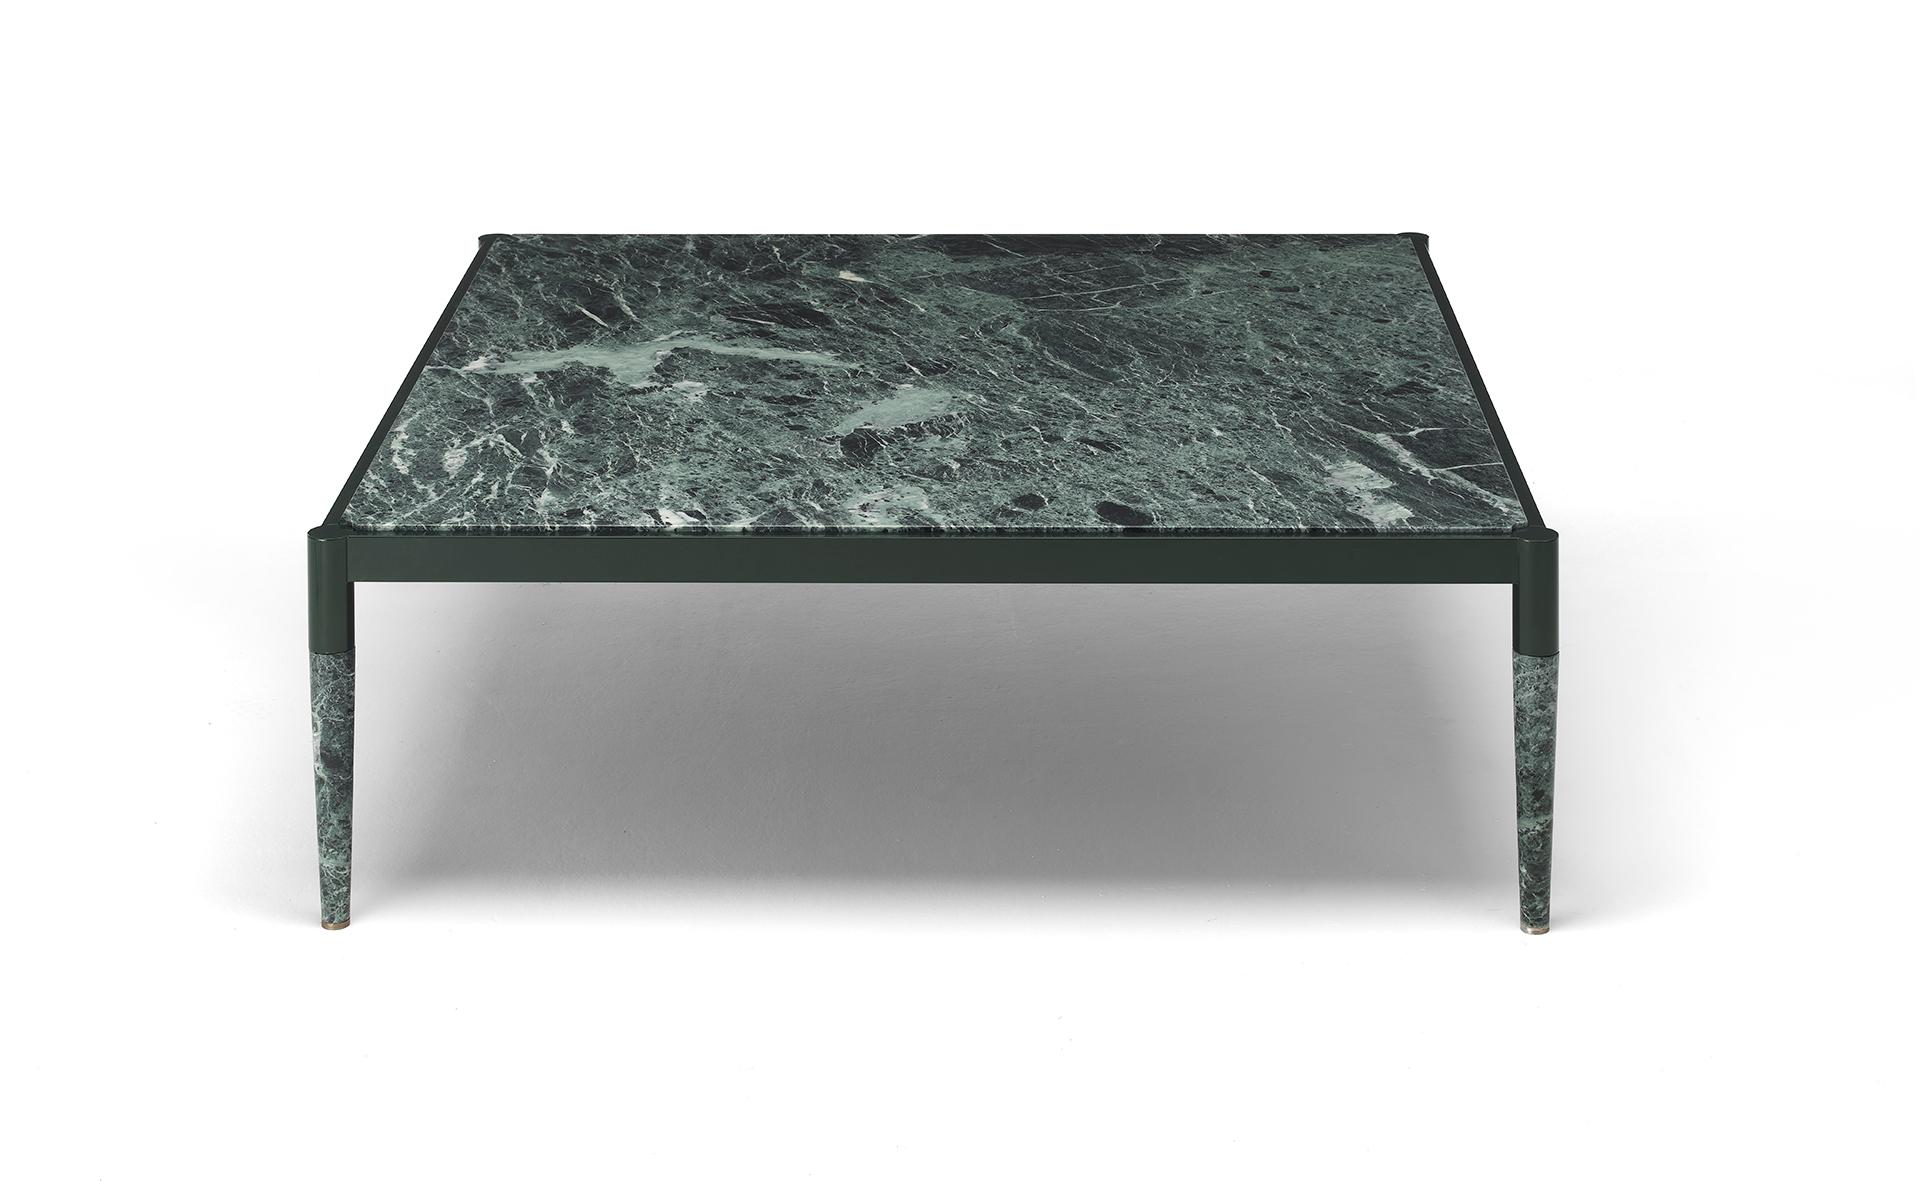 In the Bic coffee table a central aluminum frame supports the top and holds the legs, both made of marble. The resulting visual effect is that of a solid stone piece held tight by a minimalist and geometric metal crown. The marble of the top, with